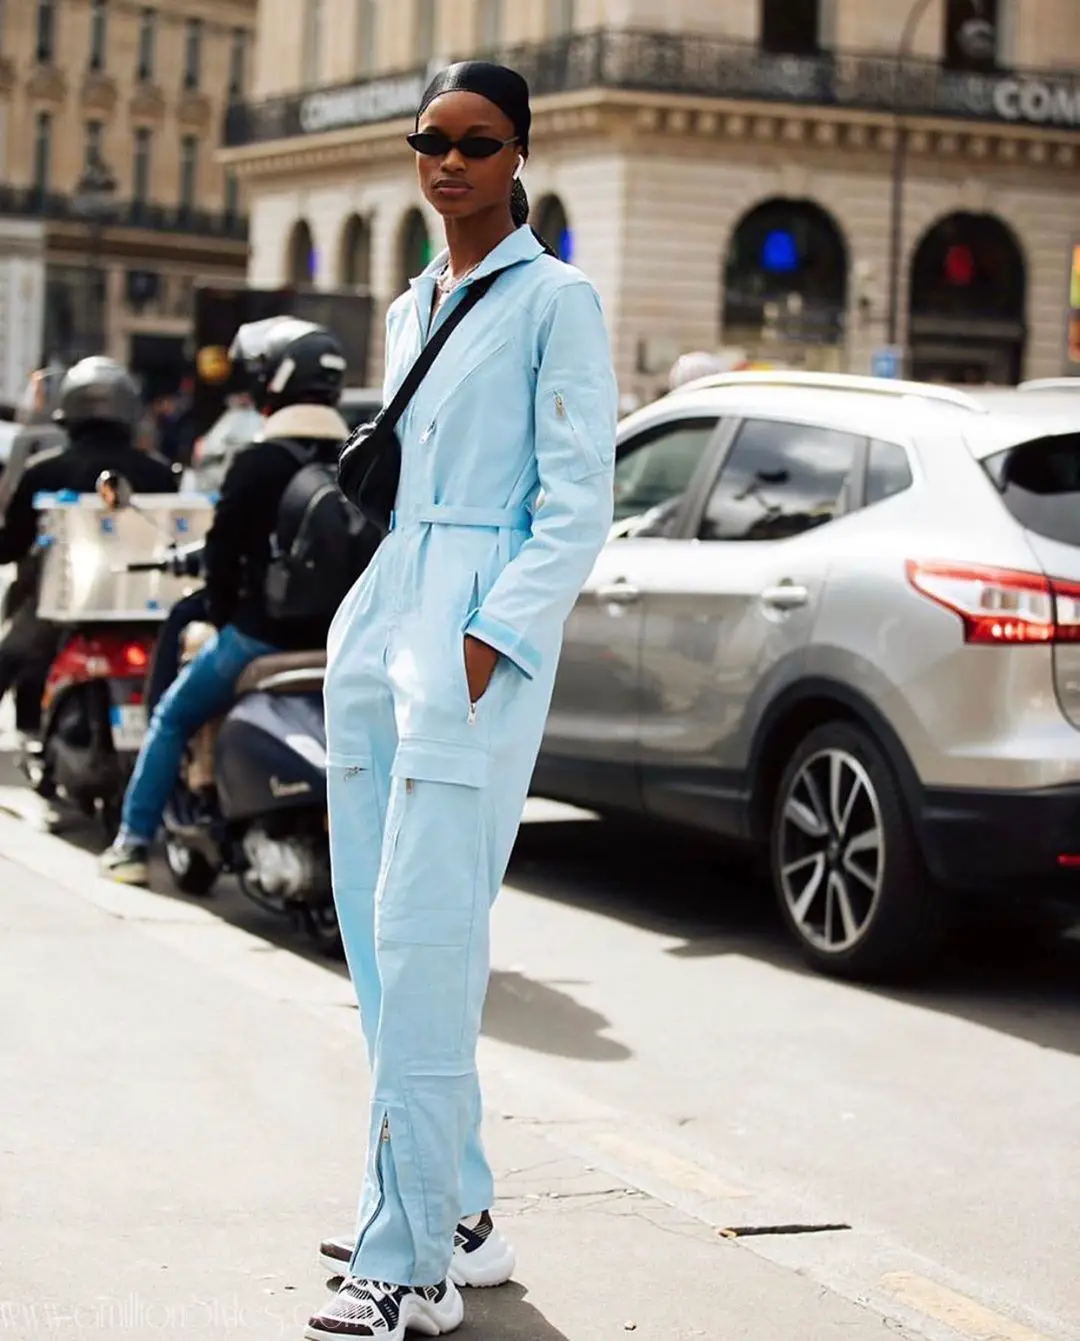 6 Jumpsuit Styles To Whet Your Appetite This Weekend